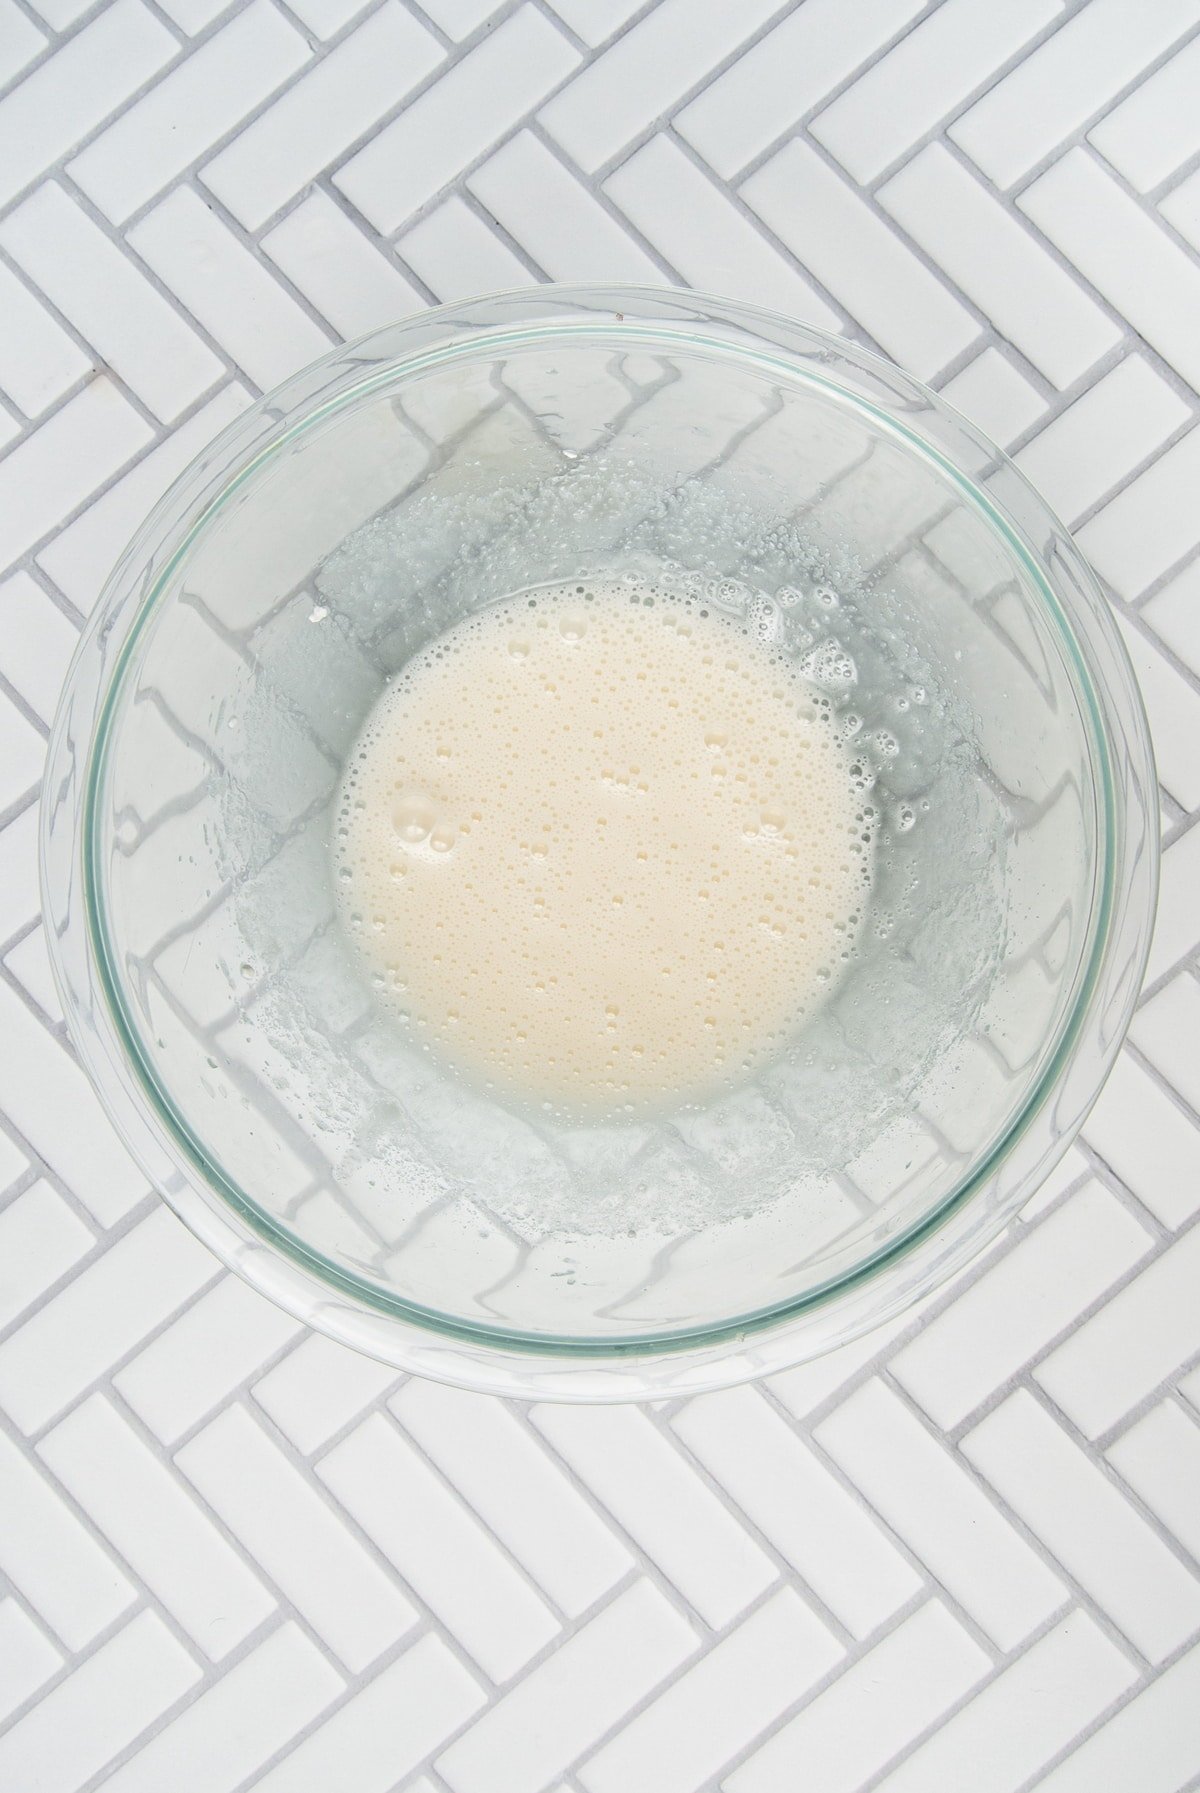 egg whites and sugar combines with hand mixer